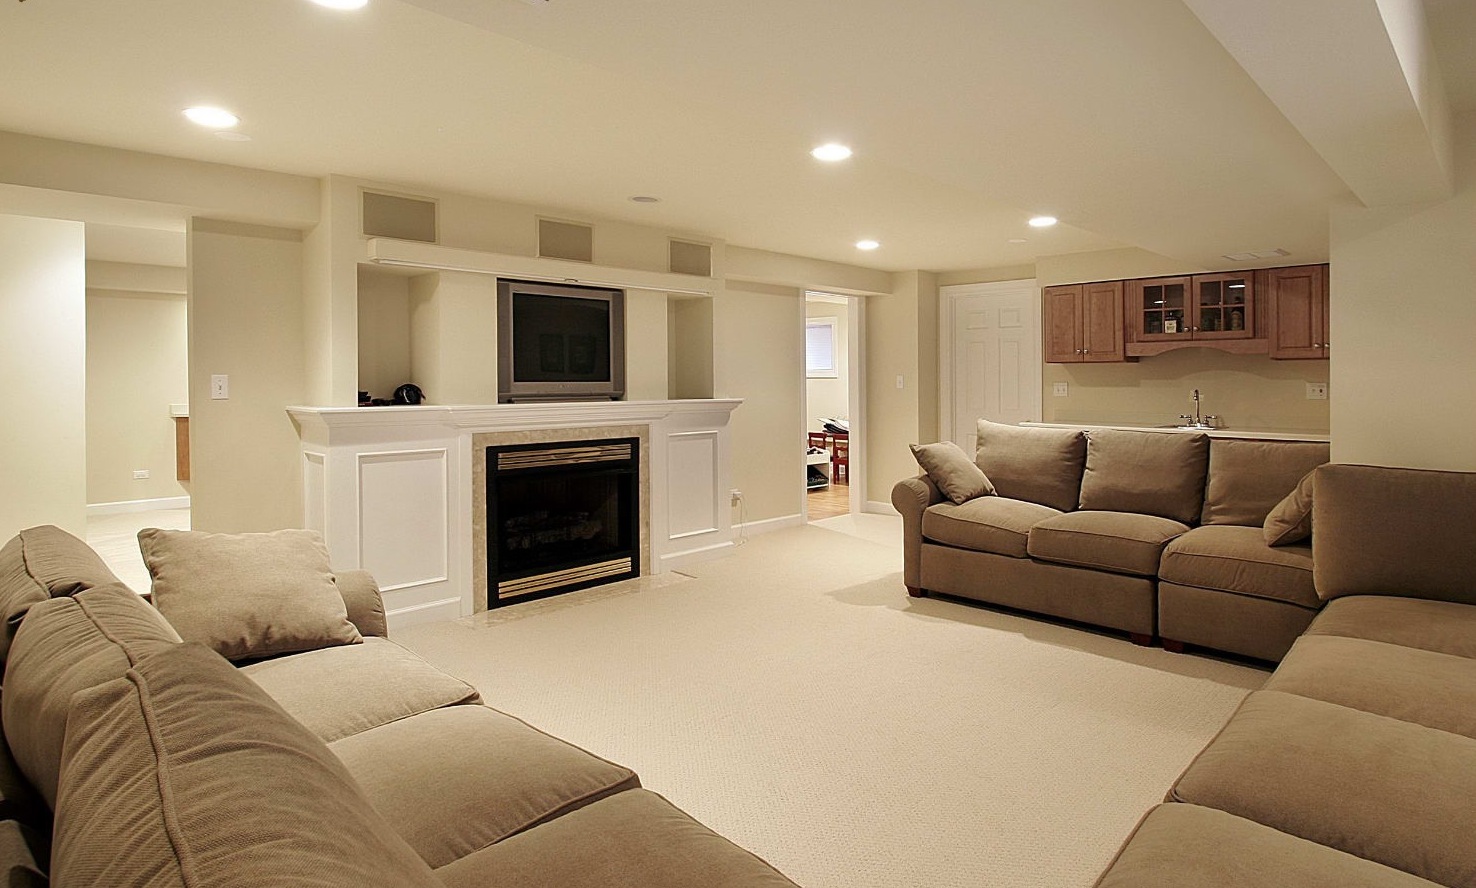 Basement Finishing Home Astonishing Minimalist Basement Finishing Ideas For Home Cinema Room Decorated With Beige Fabric Sofa And White Cabinet In Traditional Design Ideas Basement Basement Finishing Ideas Leading To Stunning Results